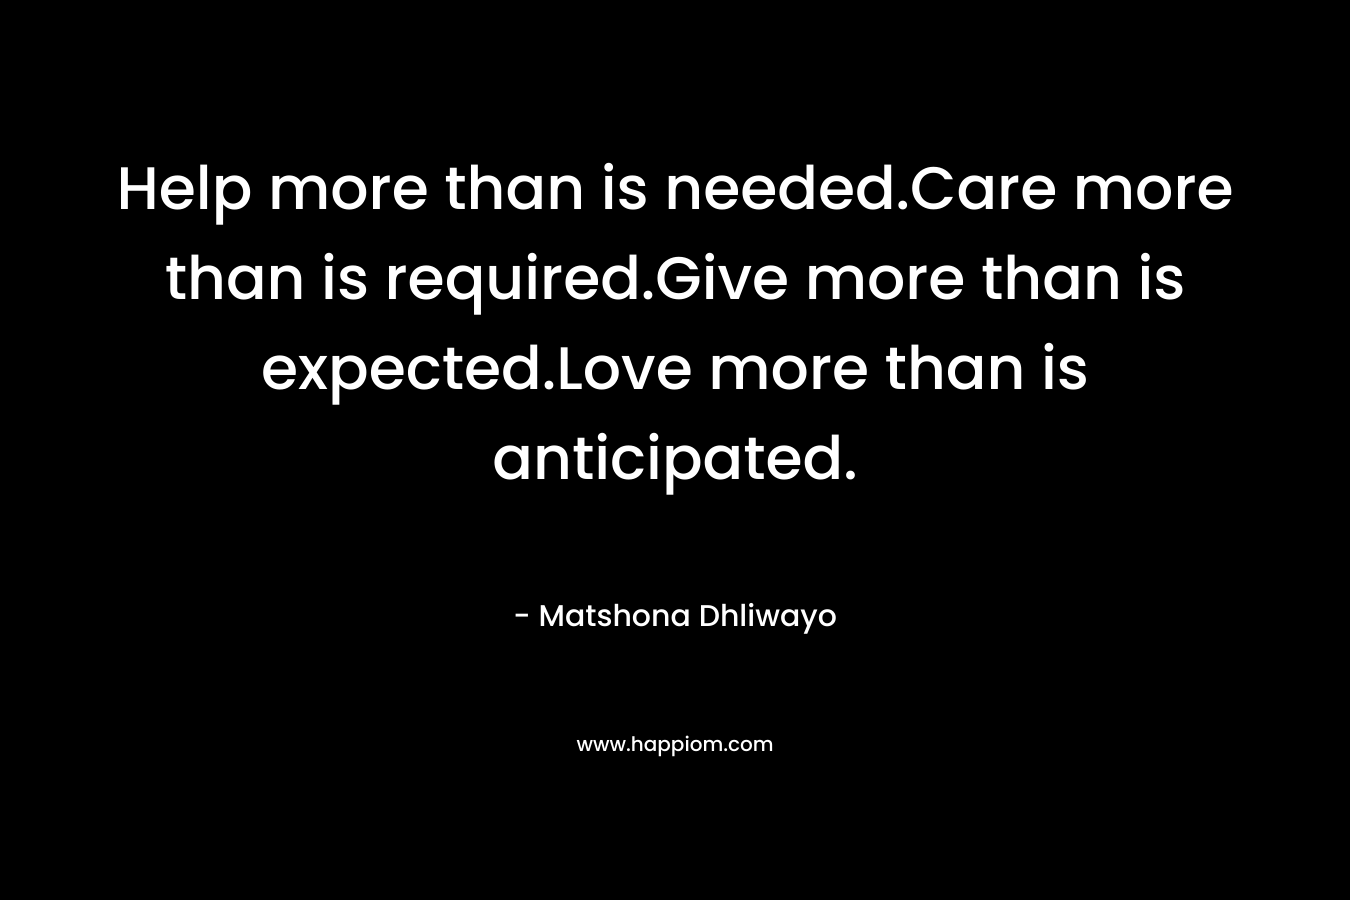 Help more than is needed.Care more than is required.Give more than is expected.Love more than is anticipated. – Matshona Dhliwayo